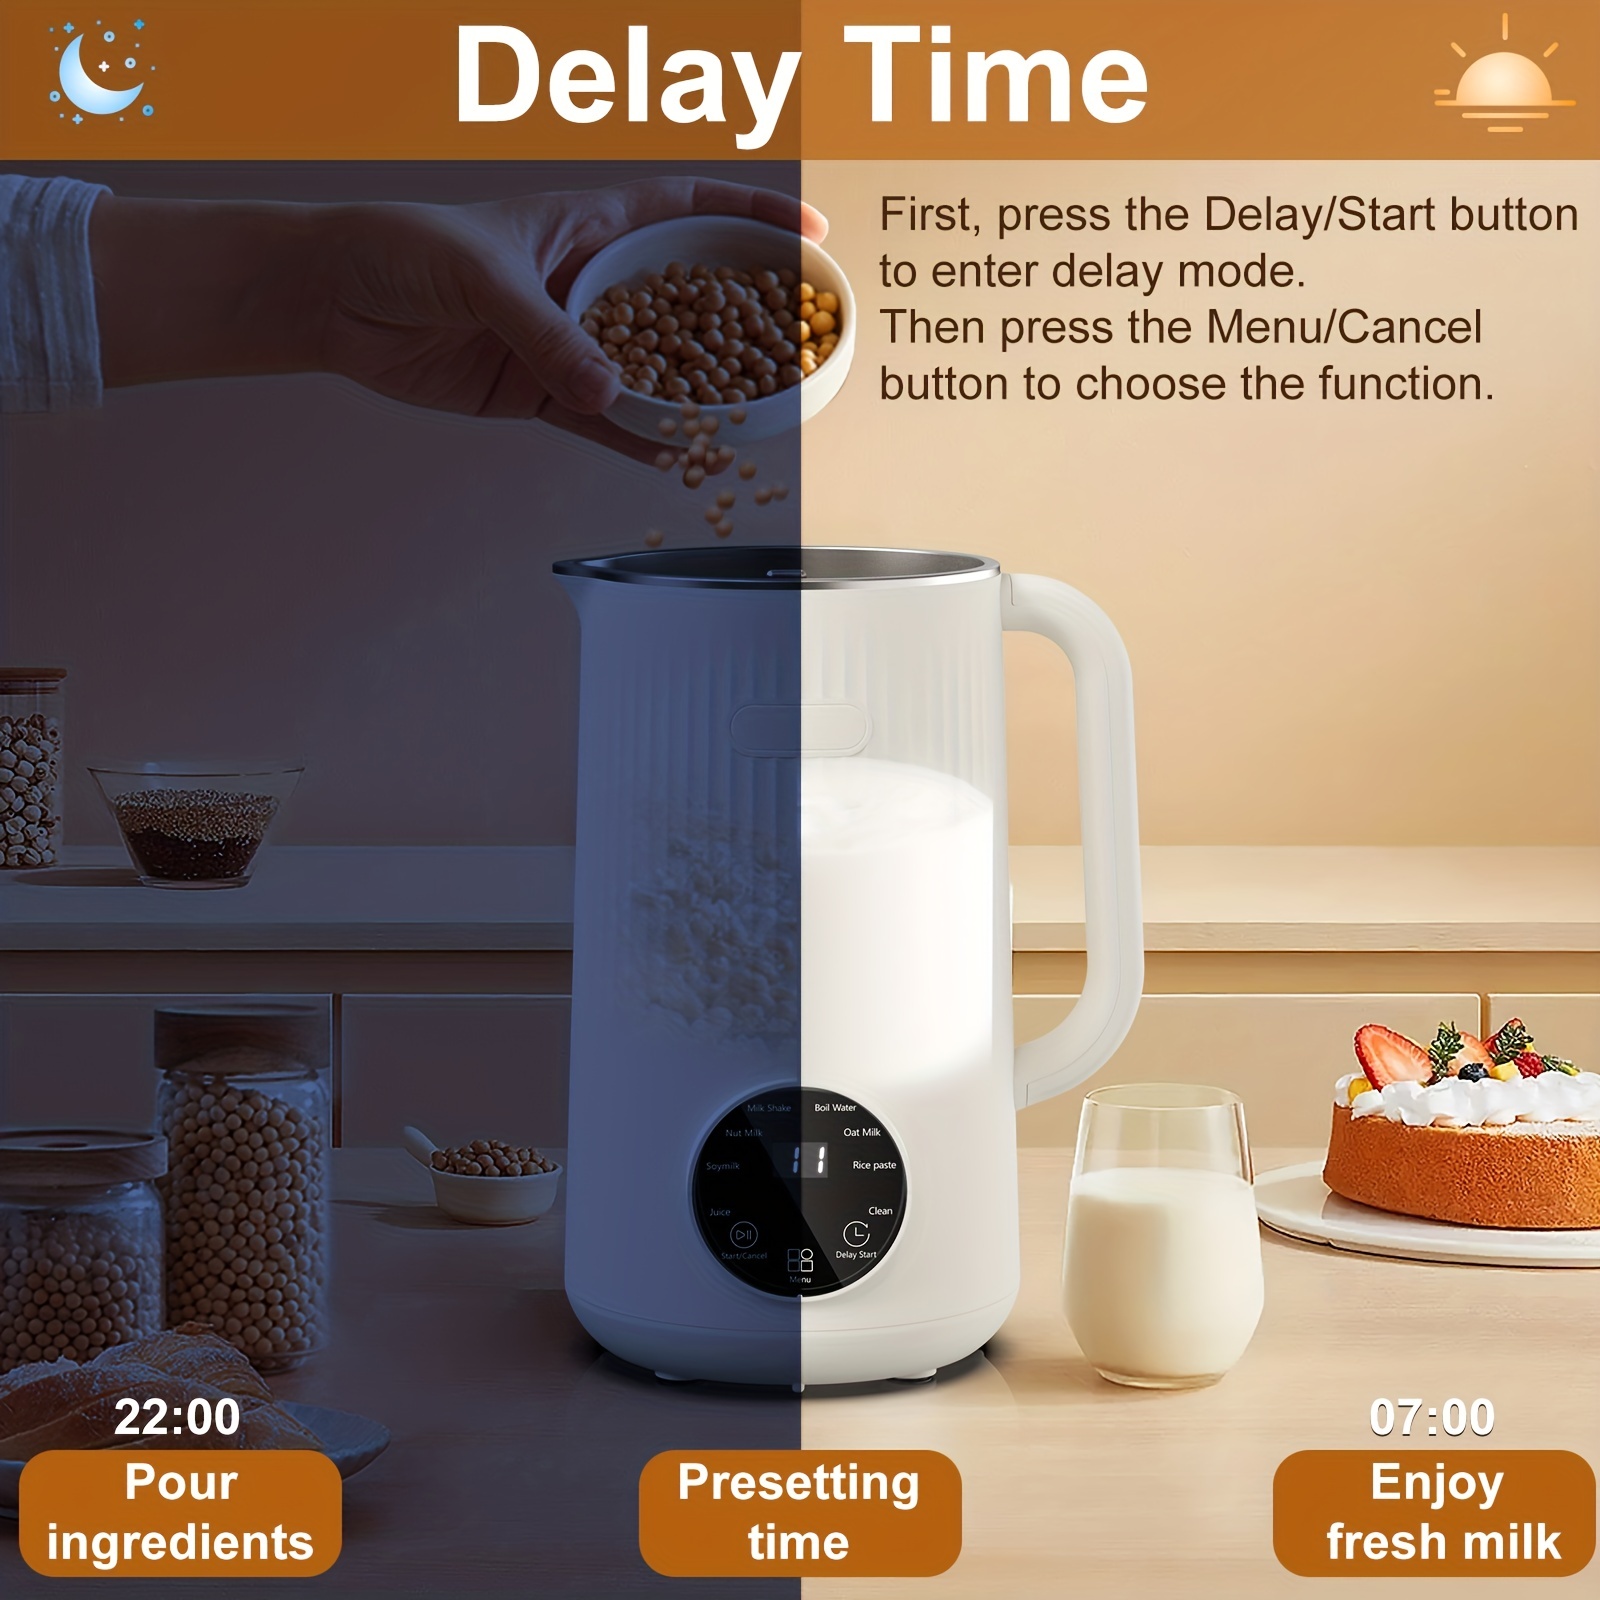 Nut Milk Maker, Automatic Almond Milk Machine for Homemade Plant-Based  Milk, Oat, Soy, Dairy Free Beverages, 20 oz Soy Milk Maker with Delay